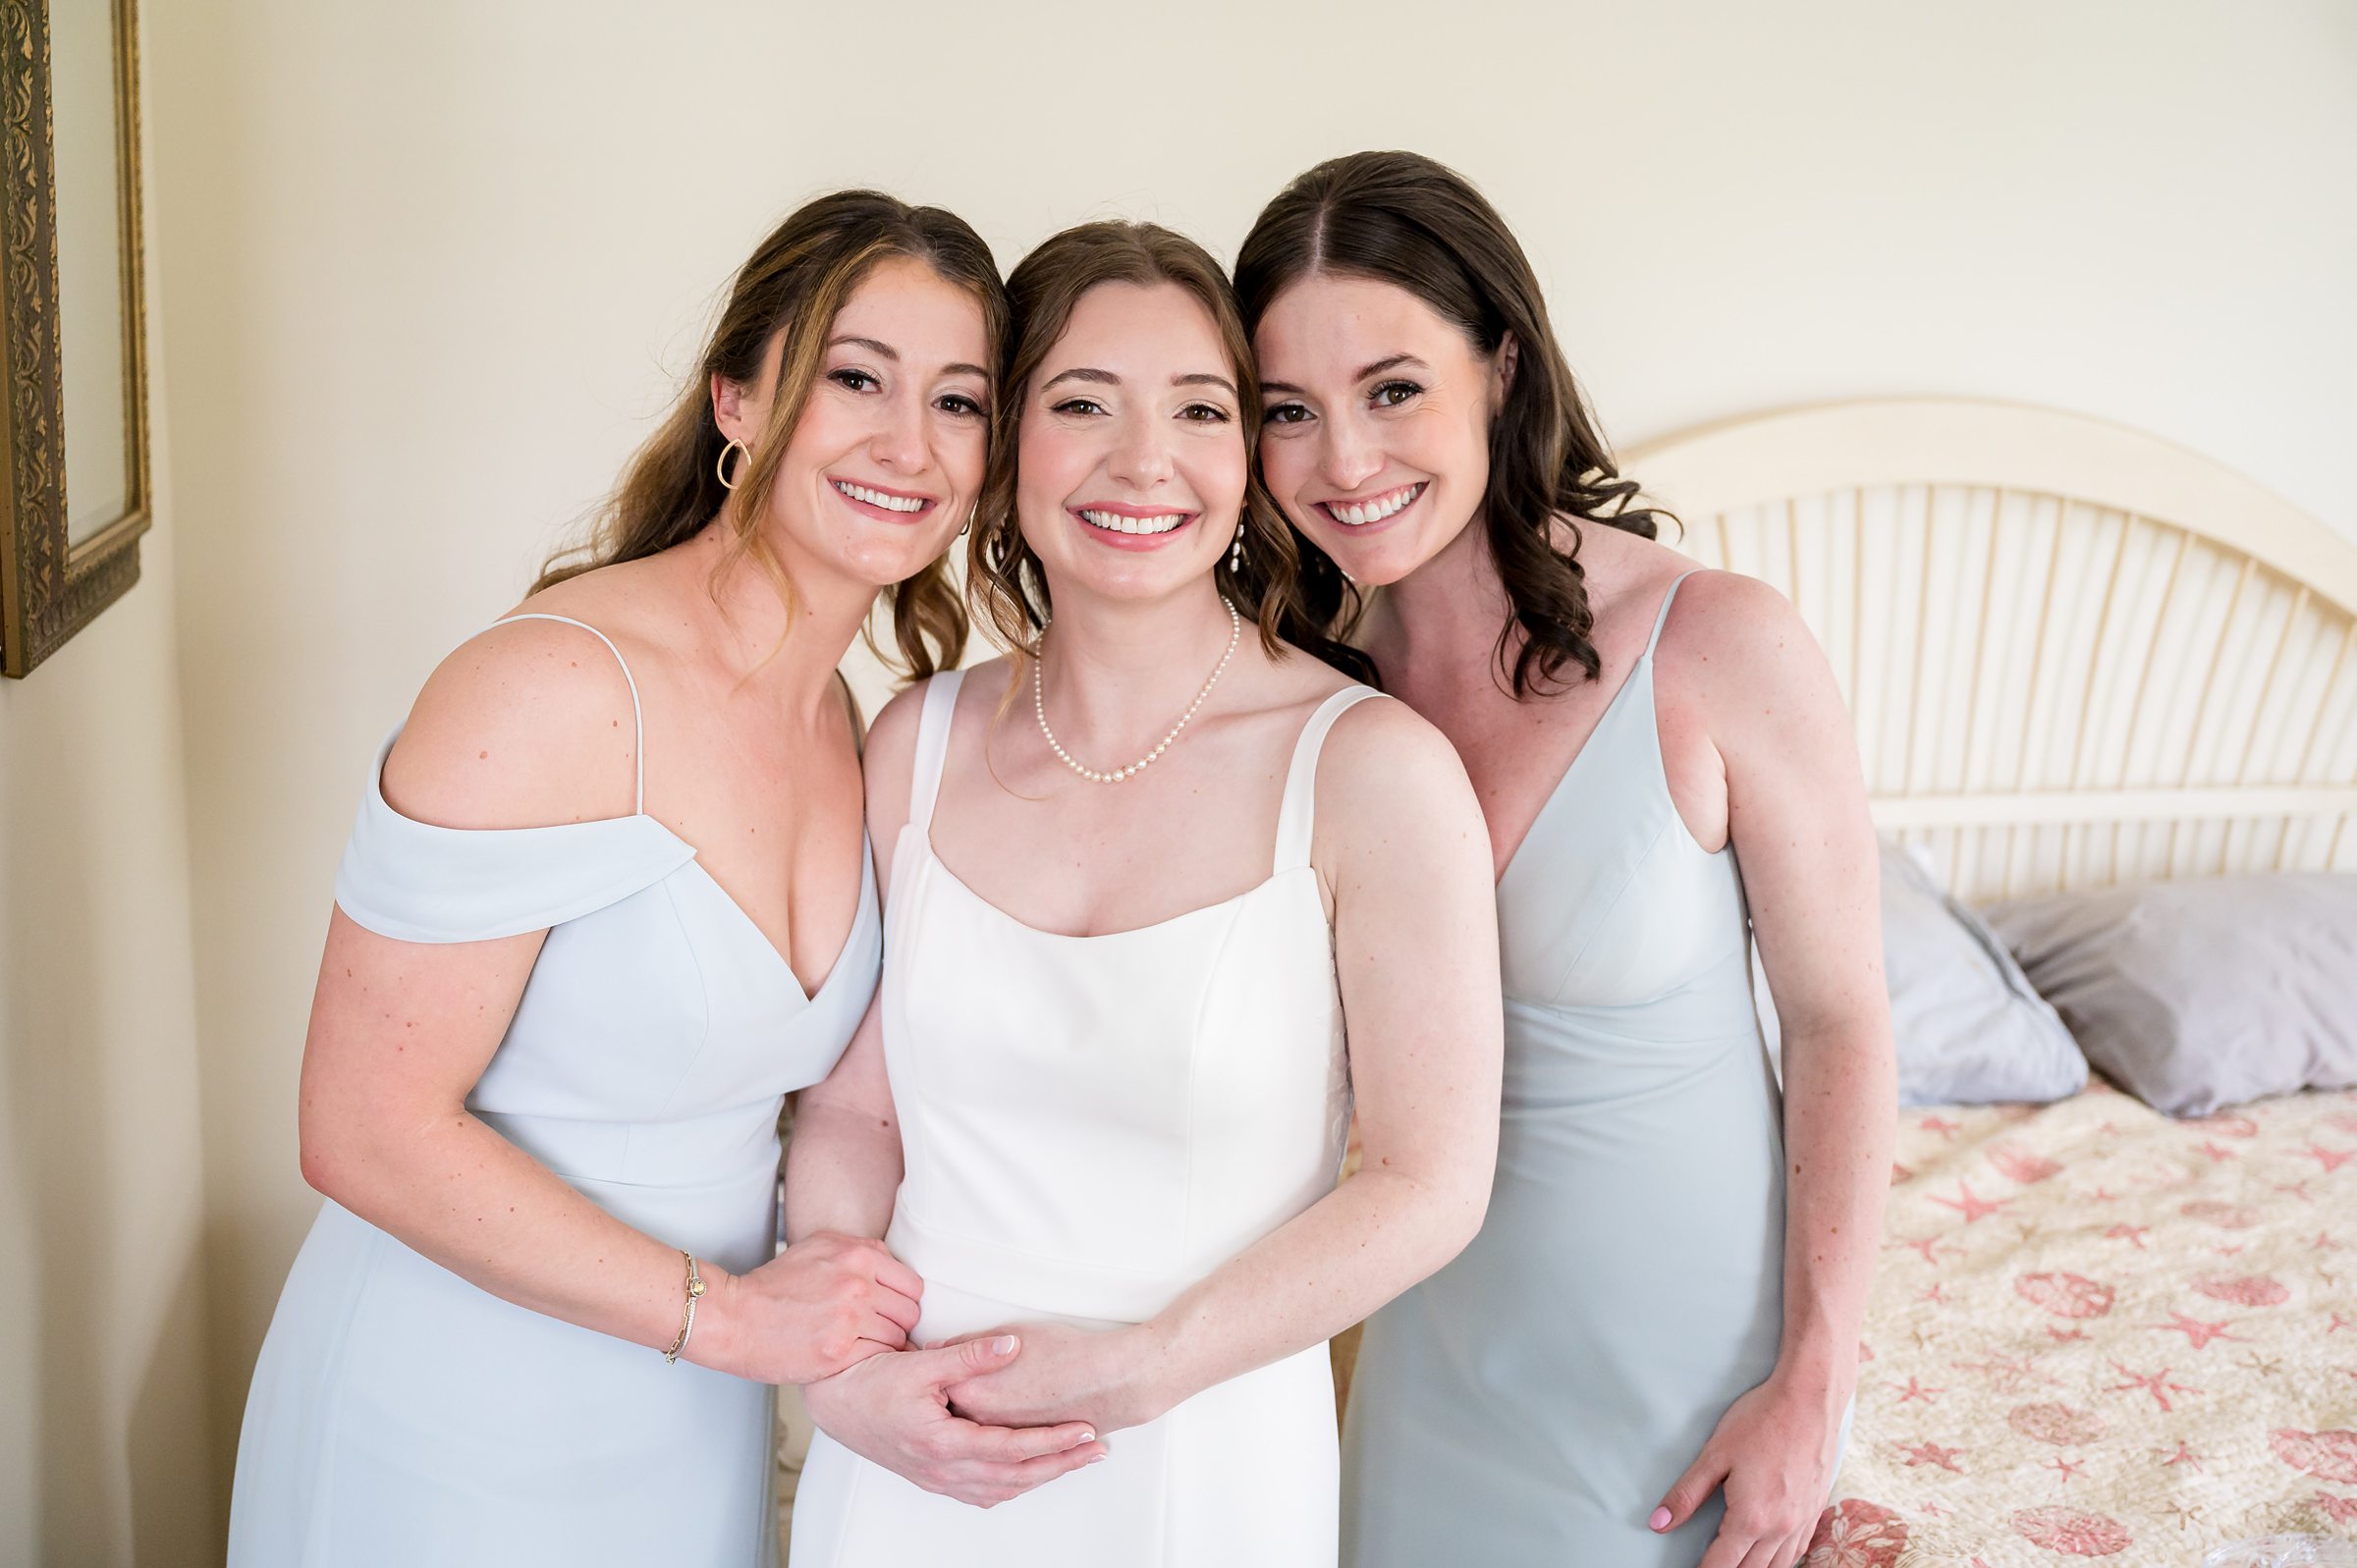 Three women pose together indoors. The woman in the center wears a white dress, and the women on either side wear light blue dresses. They are all smiling, with one bed visible in the background.